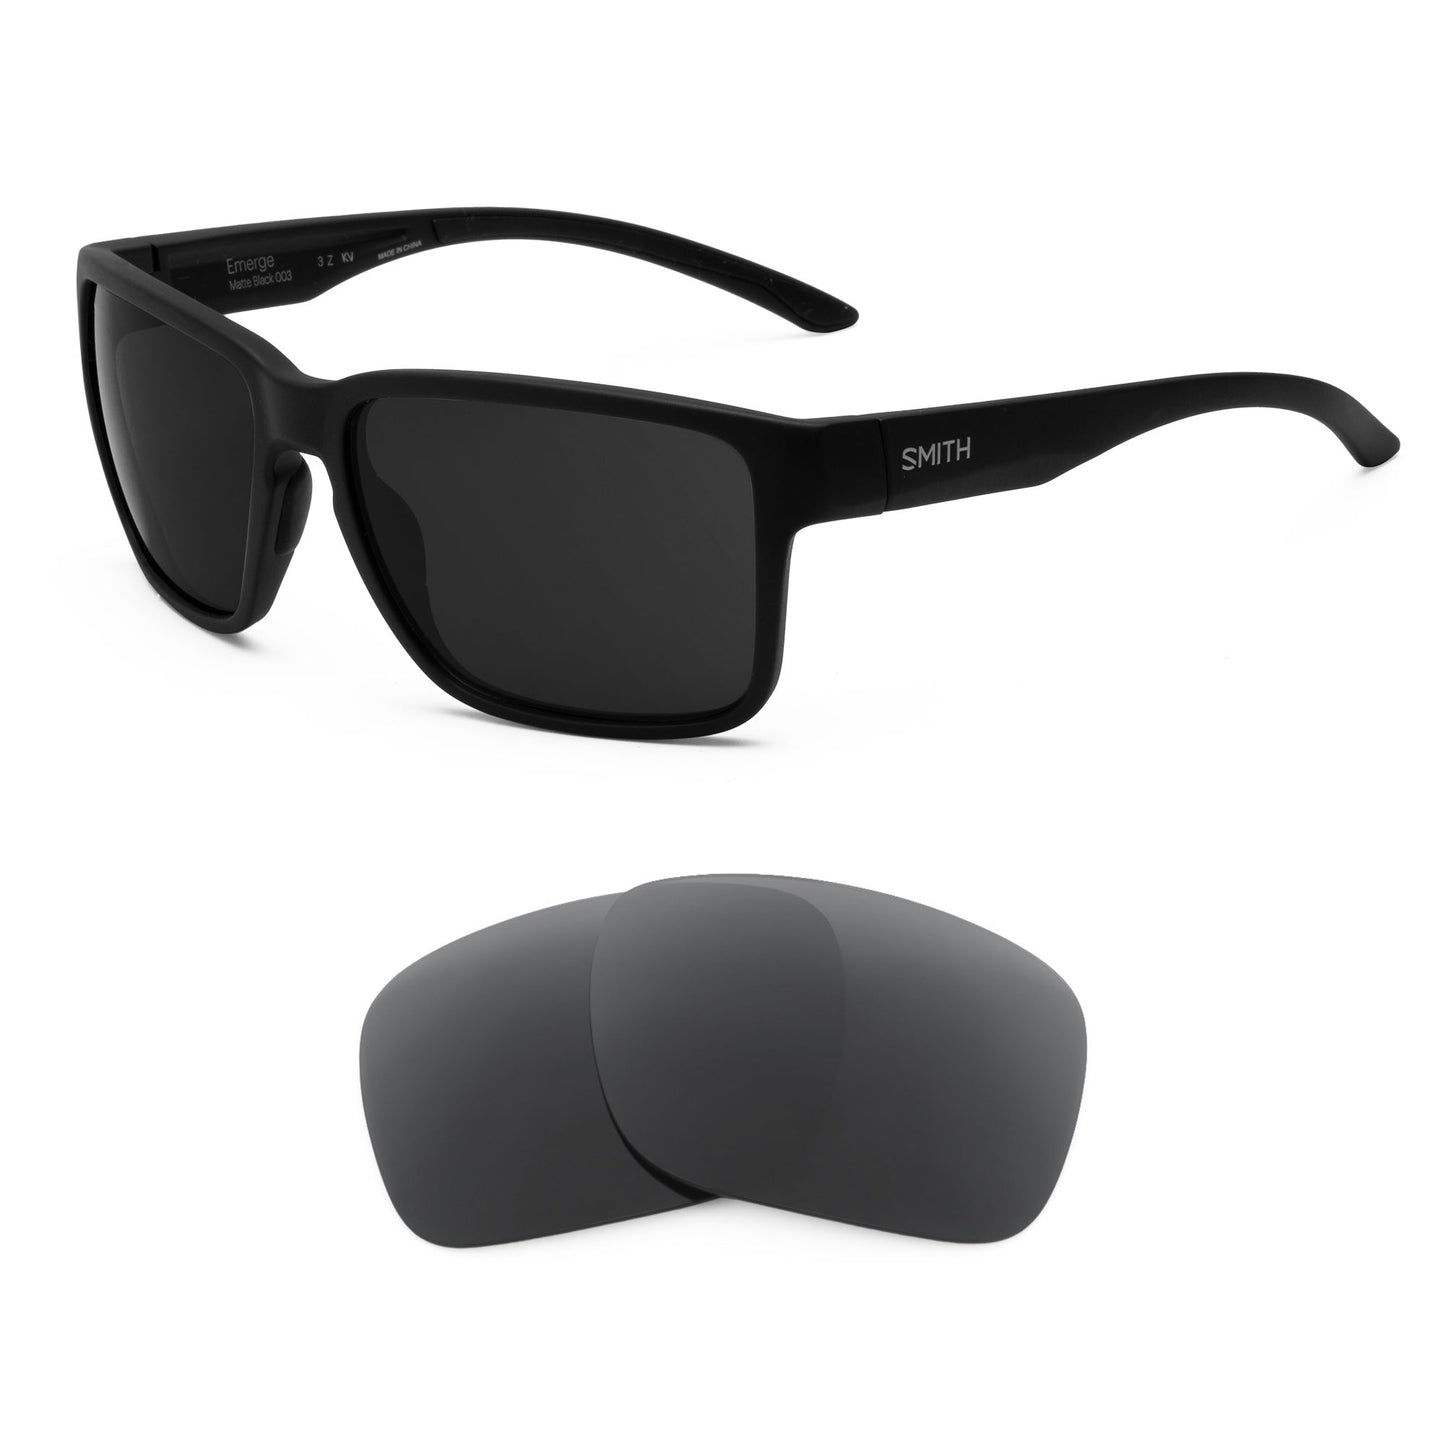 Smith Emerge sunglasses with replacement lenses